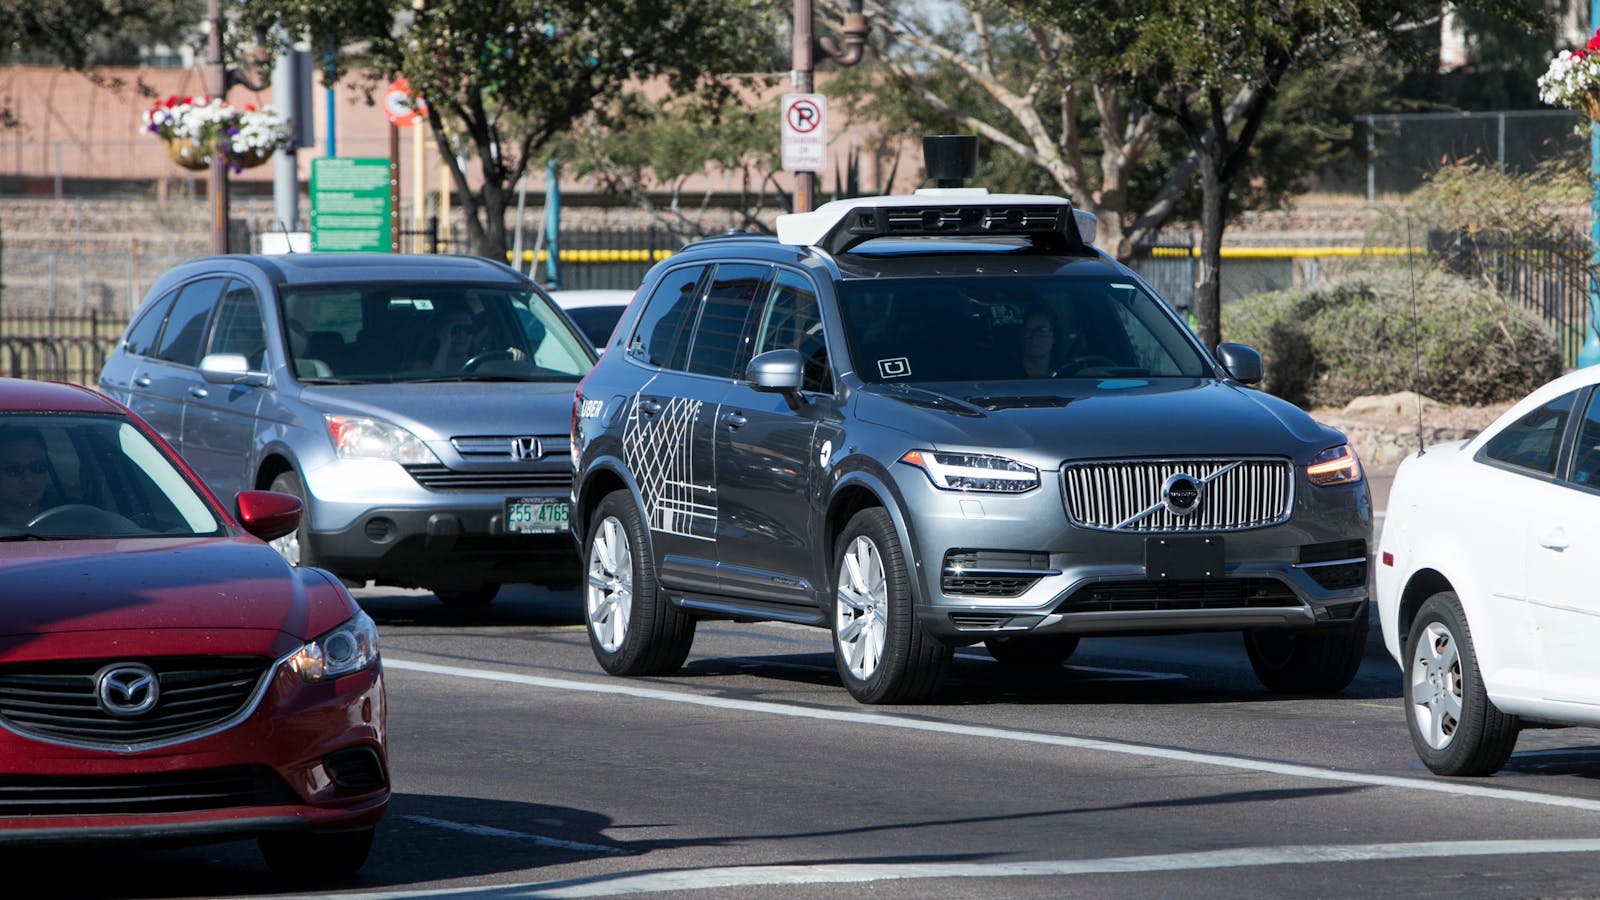 An Uber self-driving car being tested earlier this year. Photo by AP